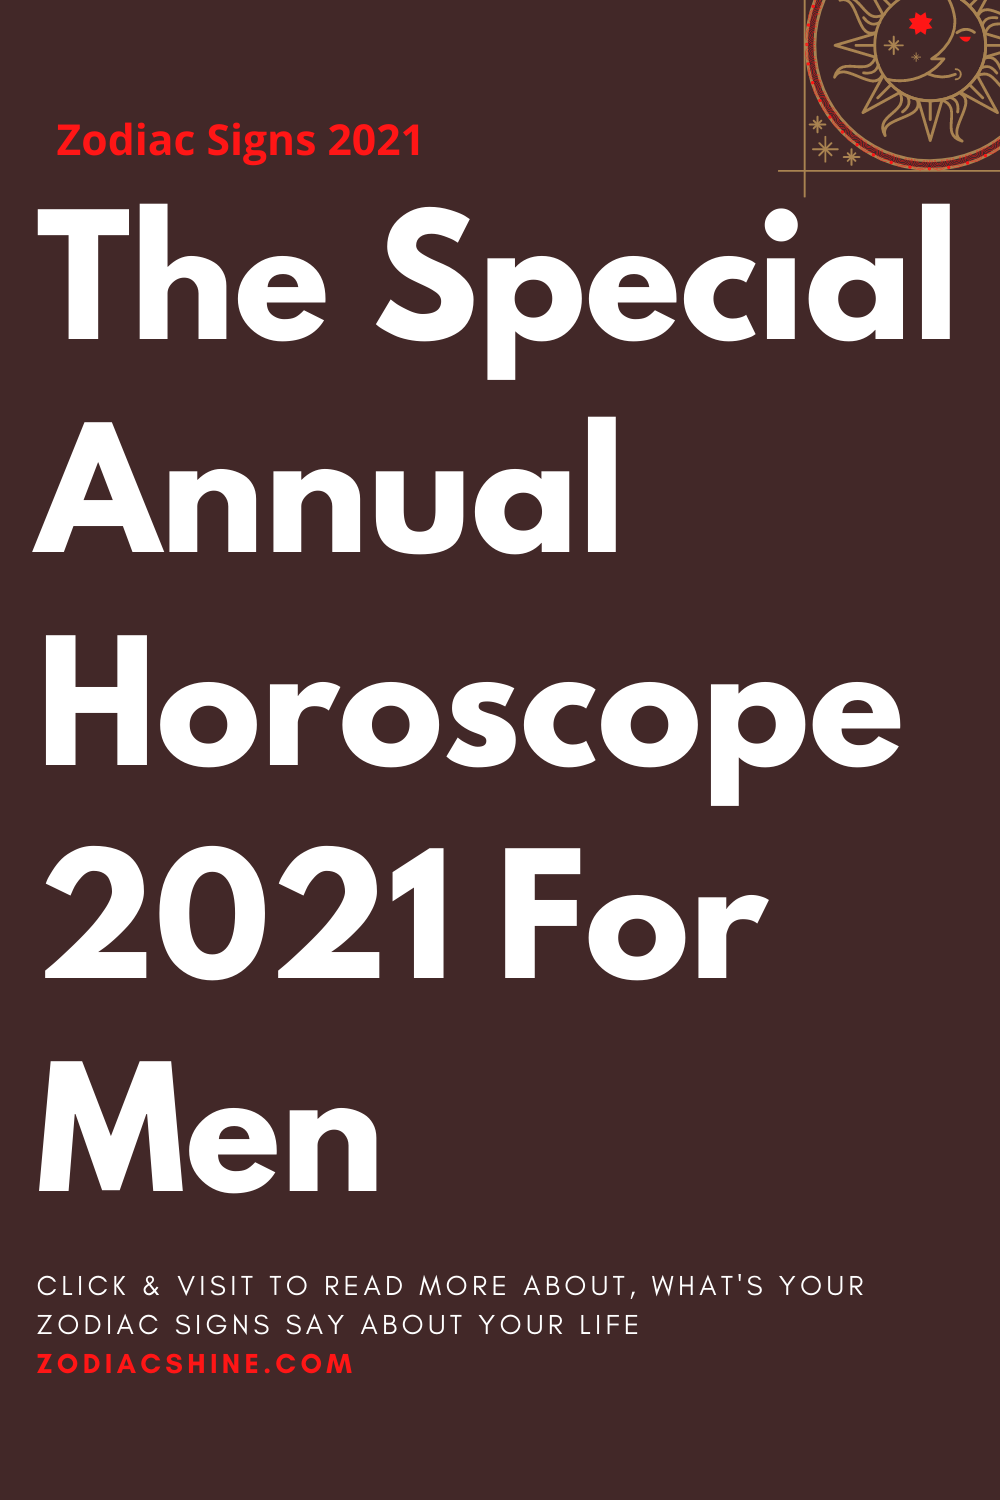 The Special Annual Horoscope 2021 For Men